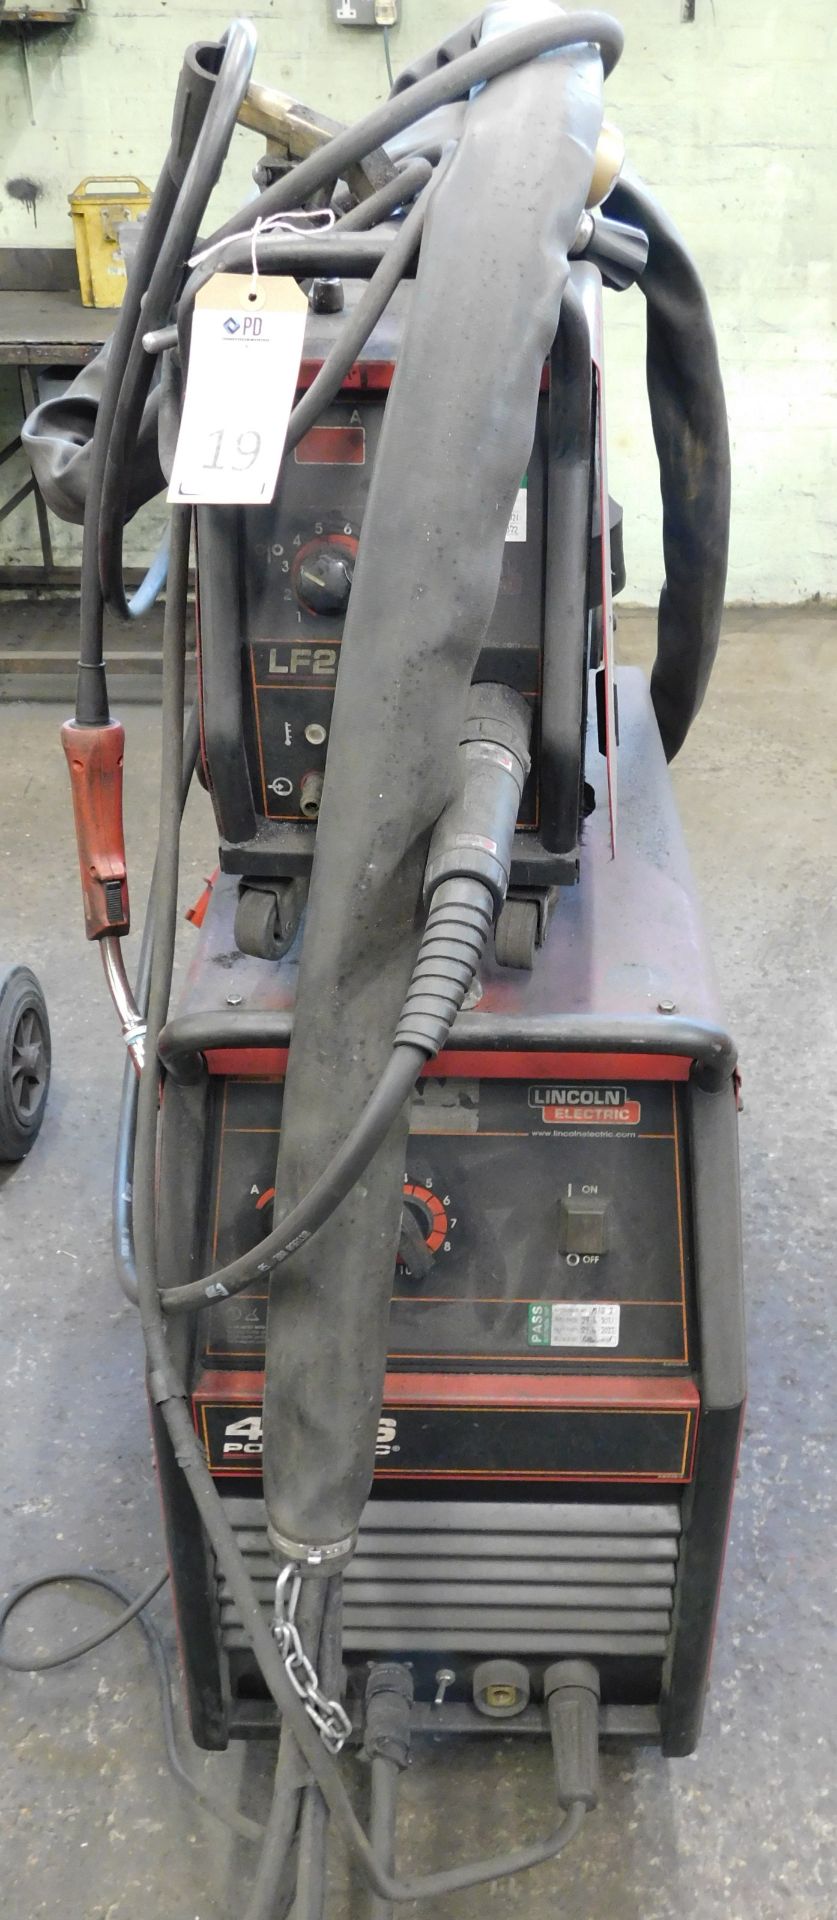 Lincoln 425 S Powertec Mig welder (2002) with LF24M Wire Feed (Location: Tottenham. Please Refer